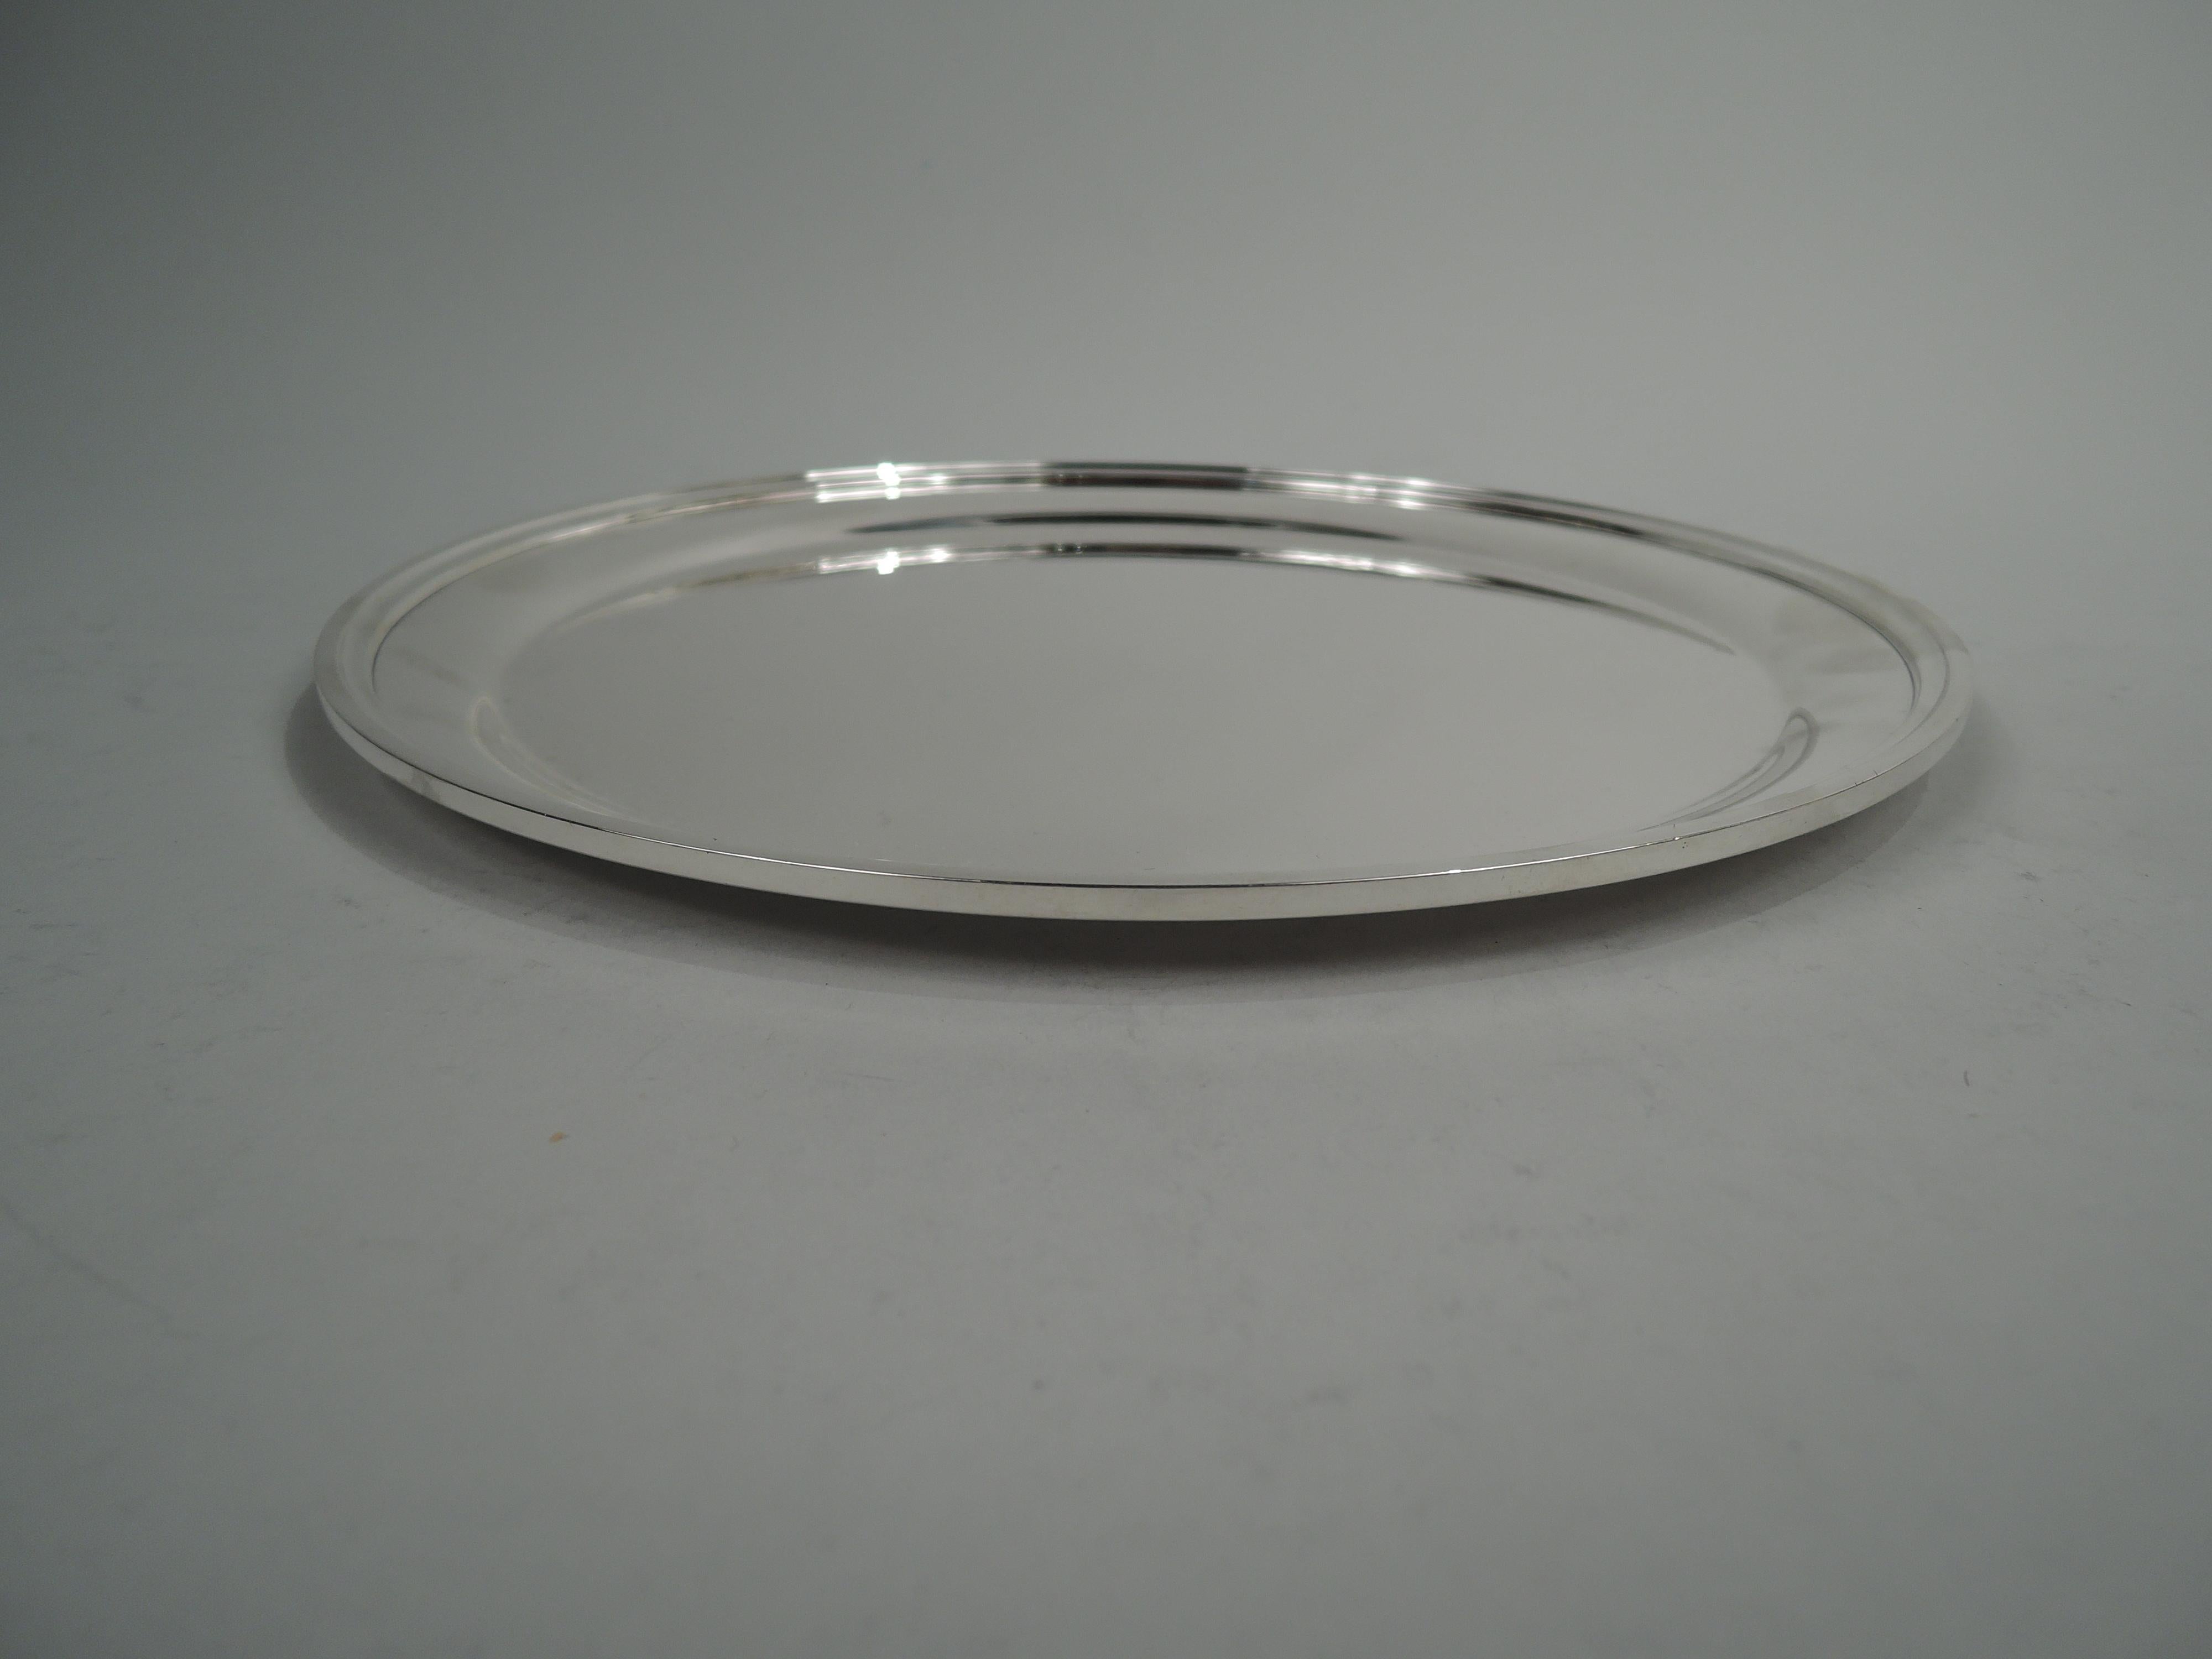 Midcentury Modern sterling silver tray. Made by S. Kirk & Son in Baltimore. Round with tapering shoulder and flat rectilinear rim. Fully marked including maker’s stamp (1932-61) and no. 4111. Heavy weight: 21 troy ounces. 